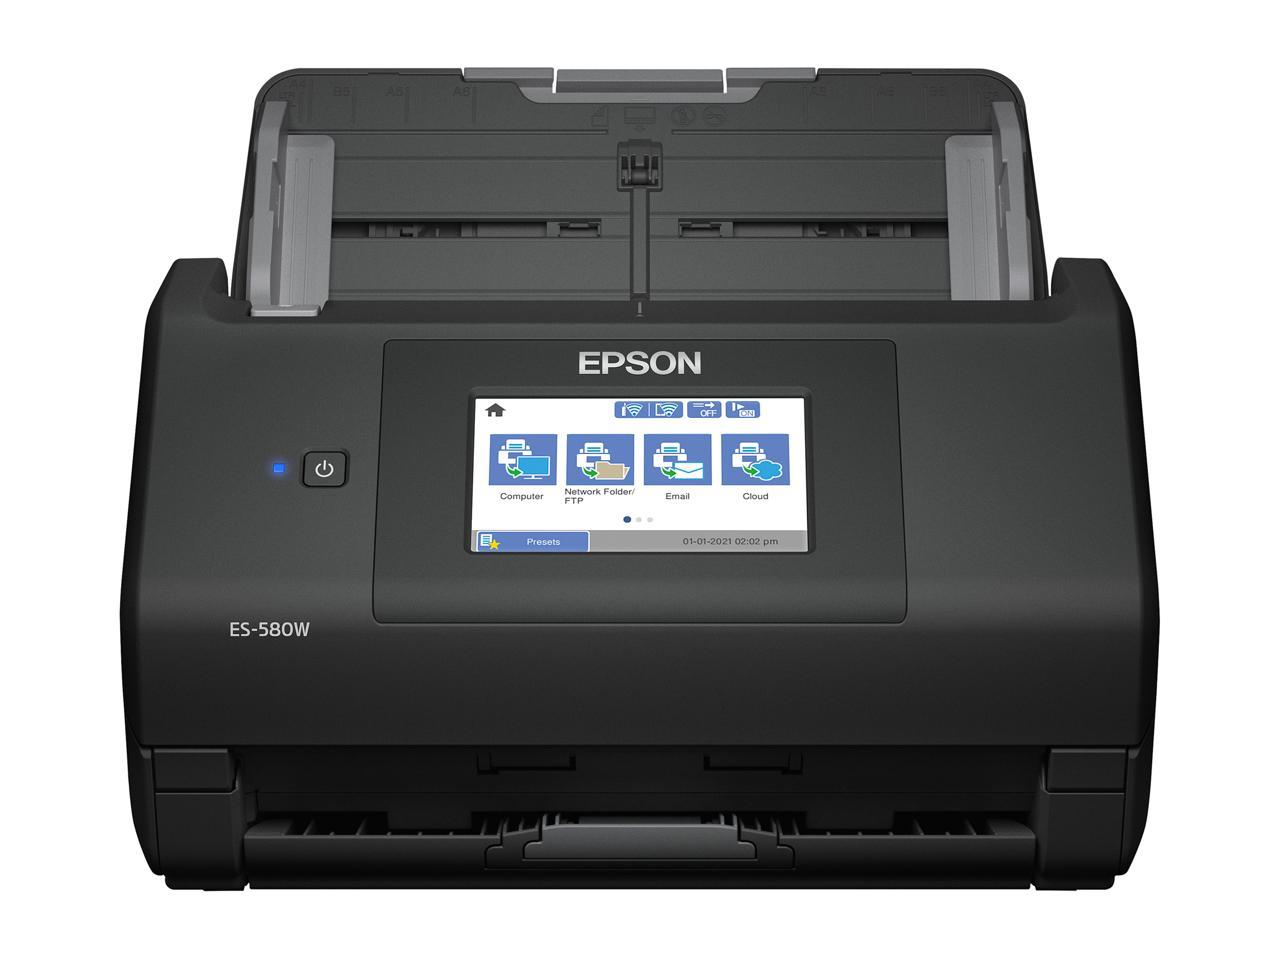 Epson Workforce Es 580w Wireless Color Duplex Desktop Document Scanner For Pc And Mac With 100 3060